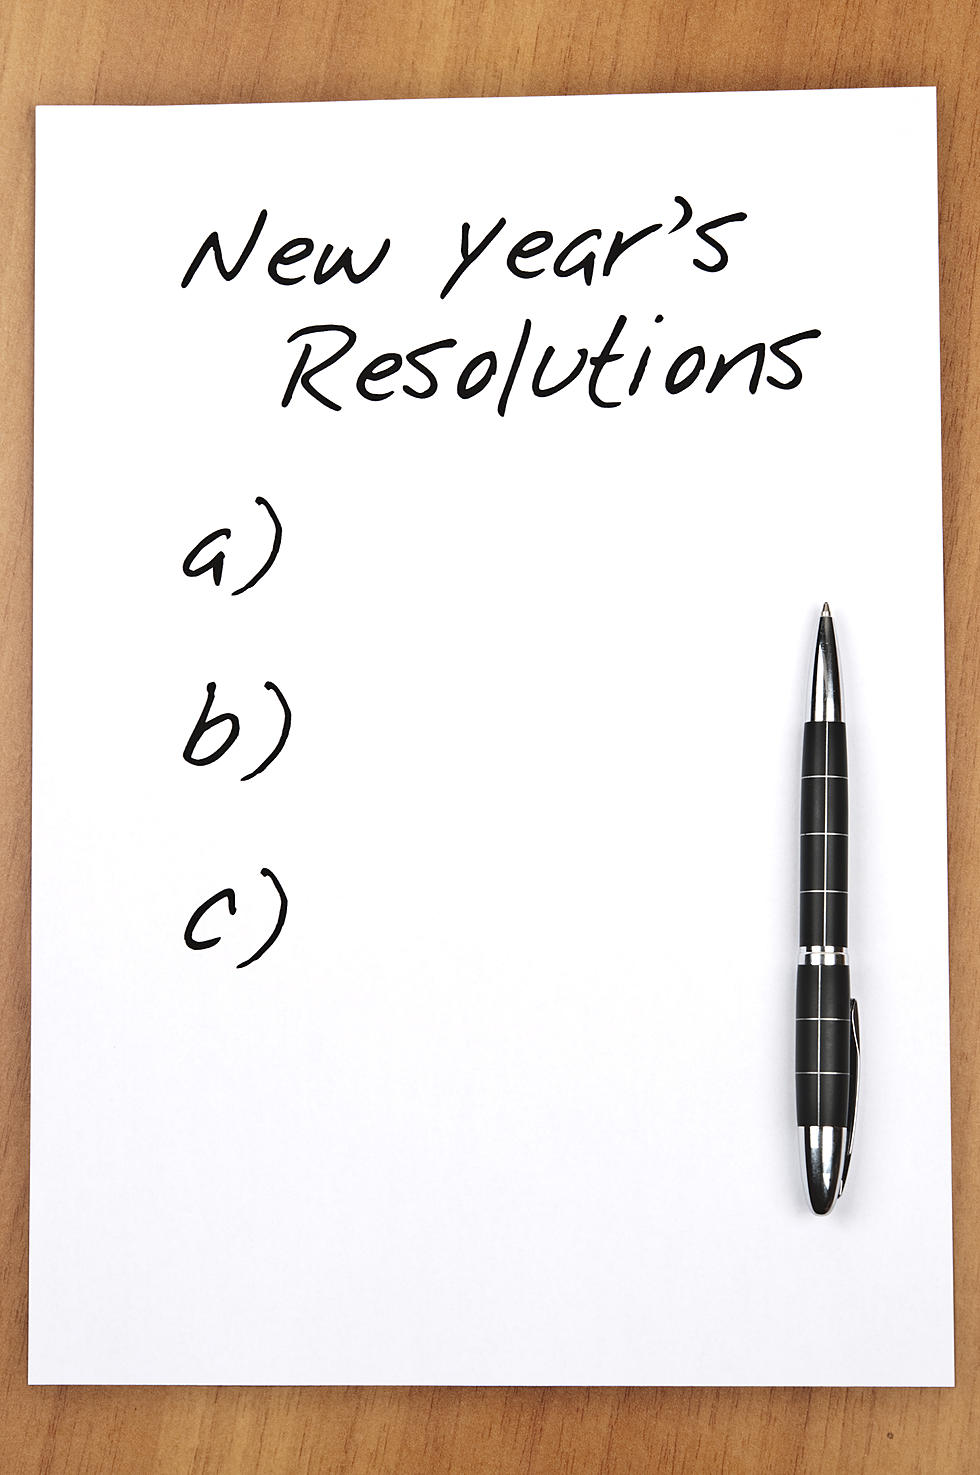 New Year’s Resolutions and Goals